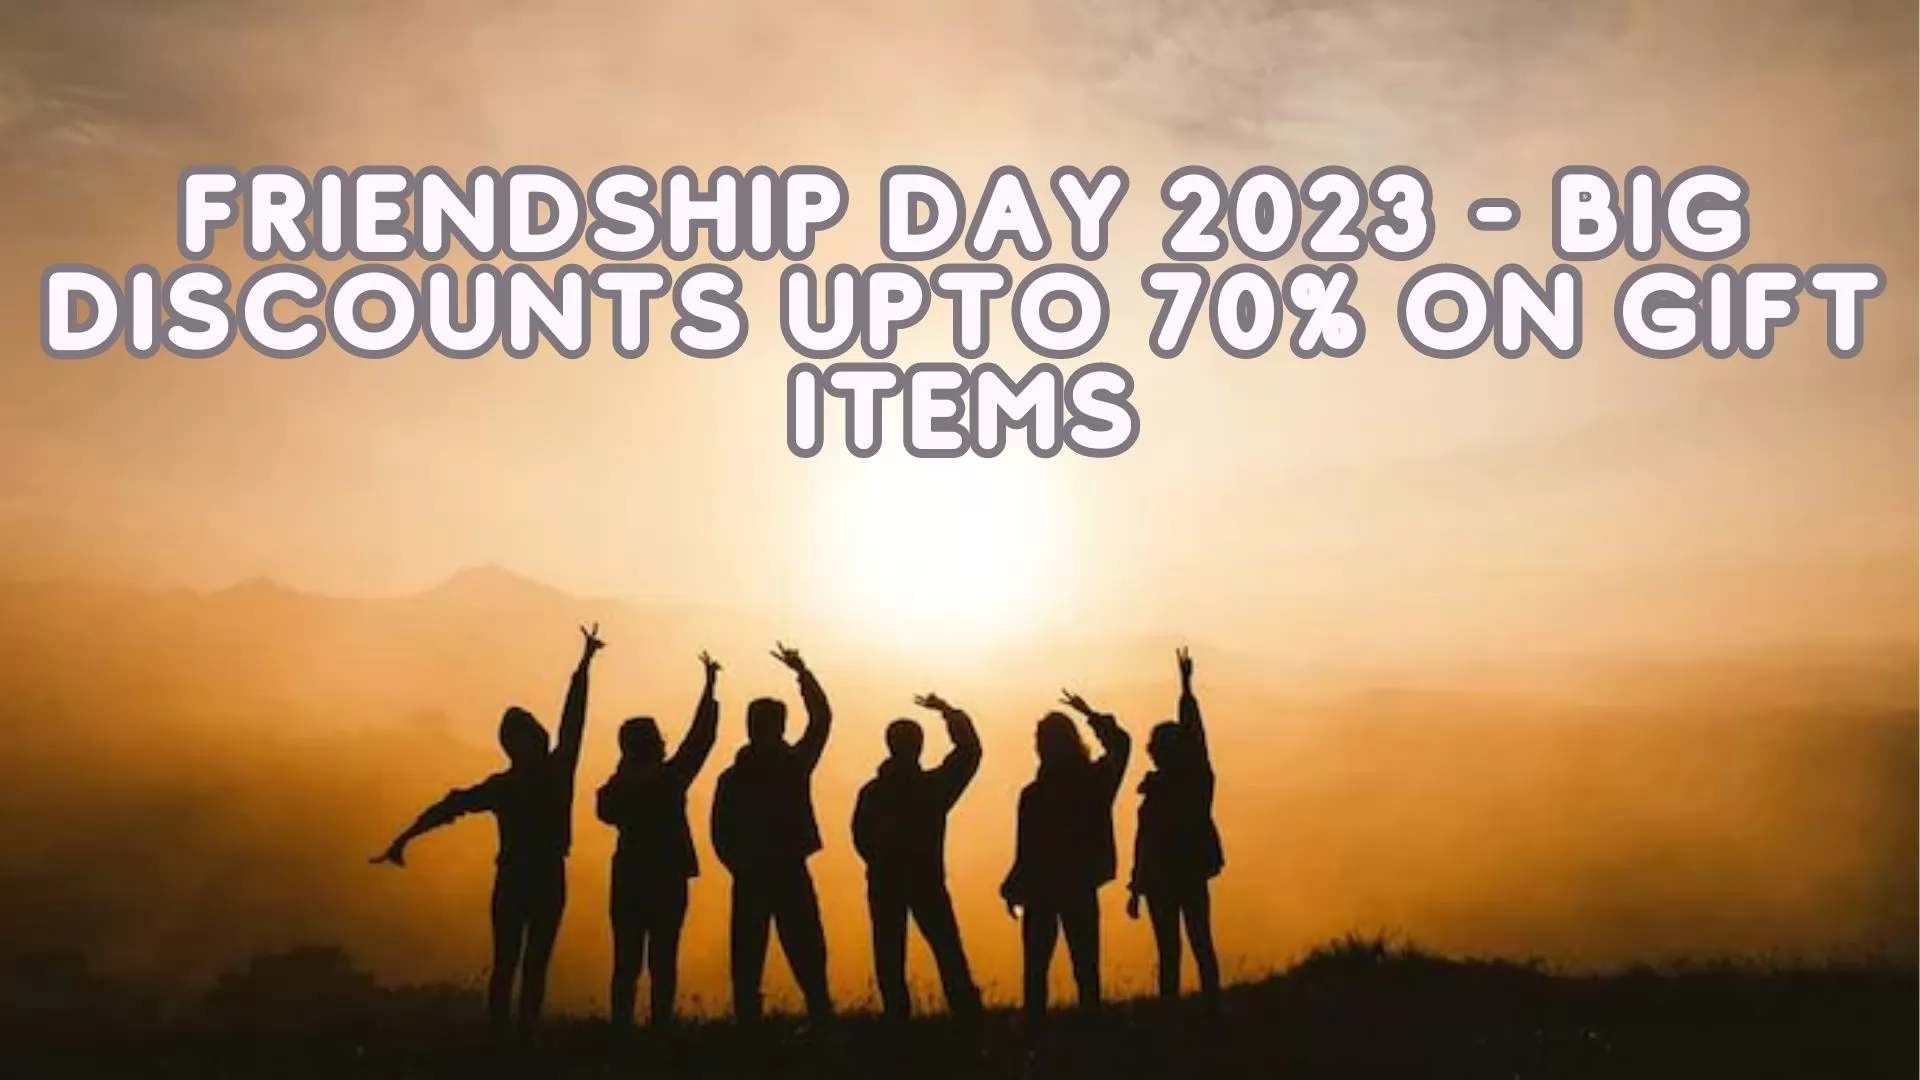 Friendship Day 2023 - Big Discounts Upto 70% On Gift Items